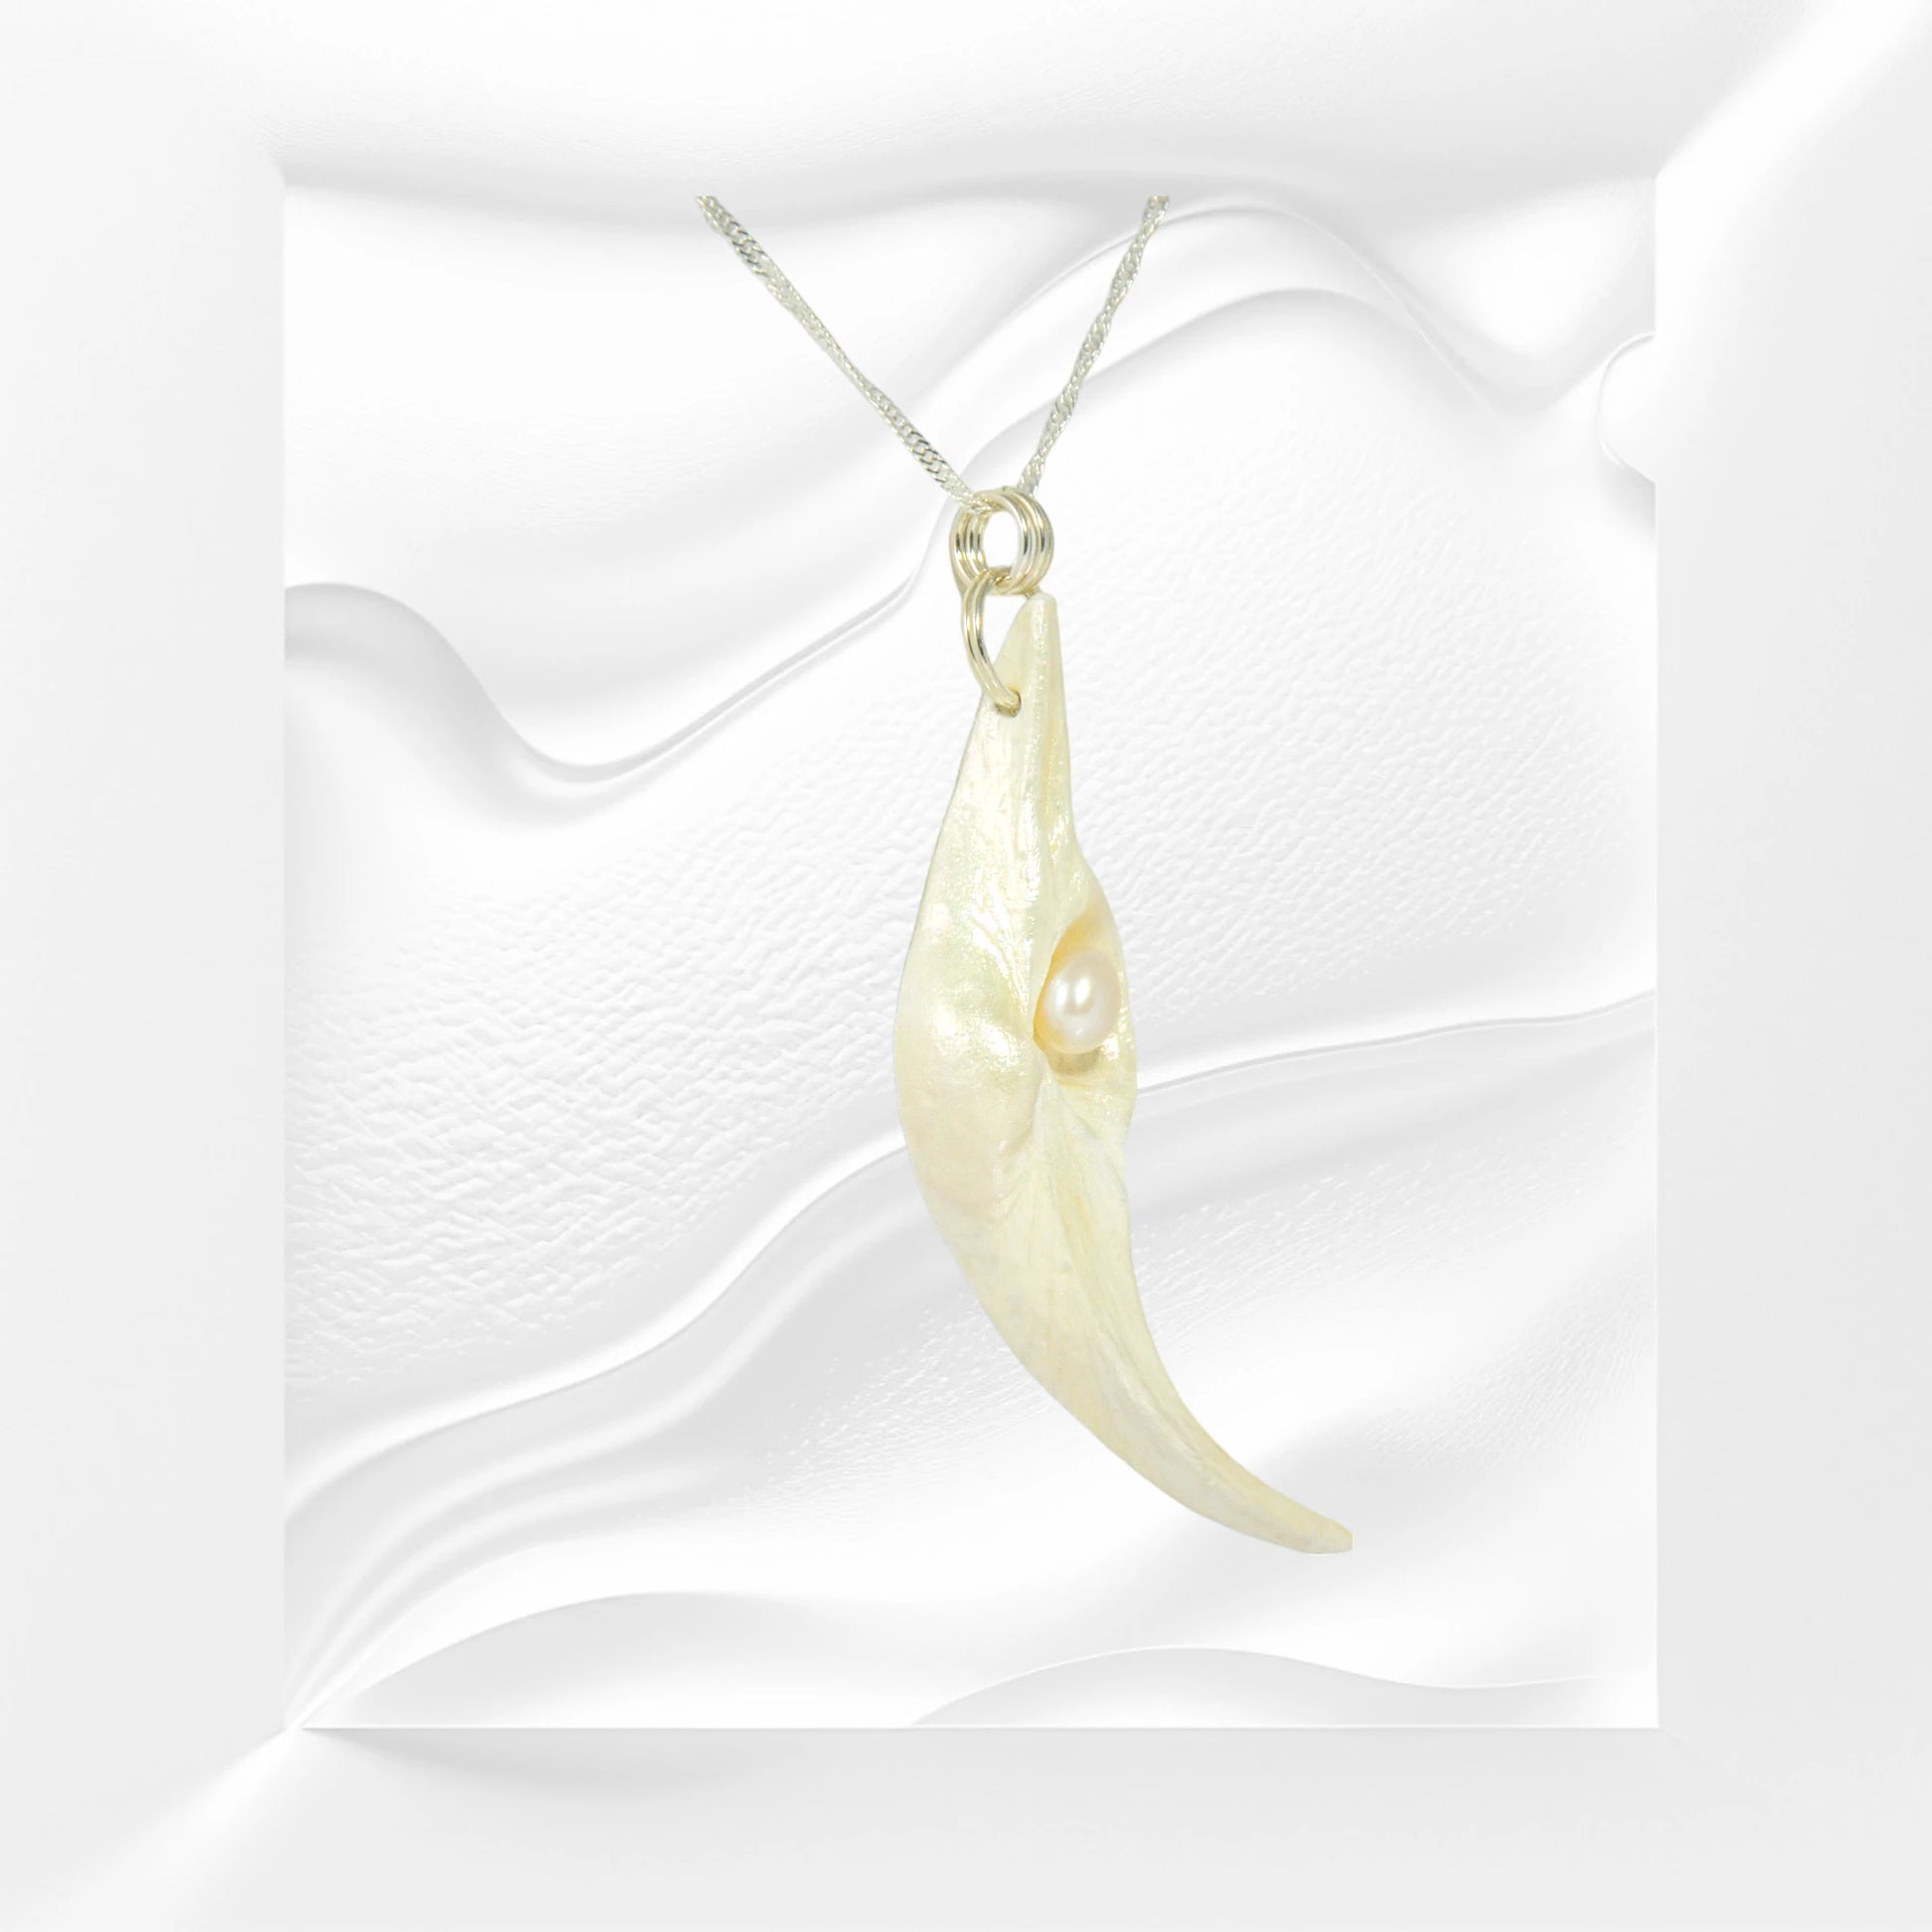 Jupiter is a natural seashell pendant with a real freshwater pearl.